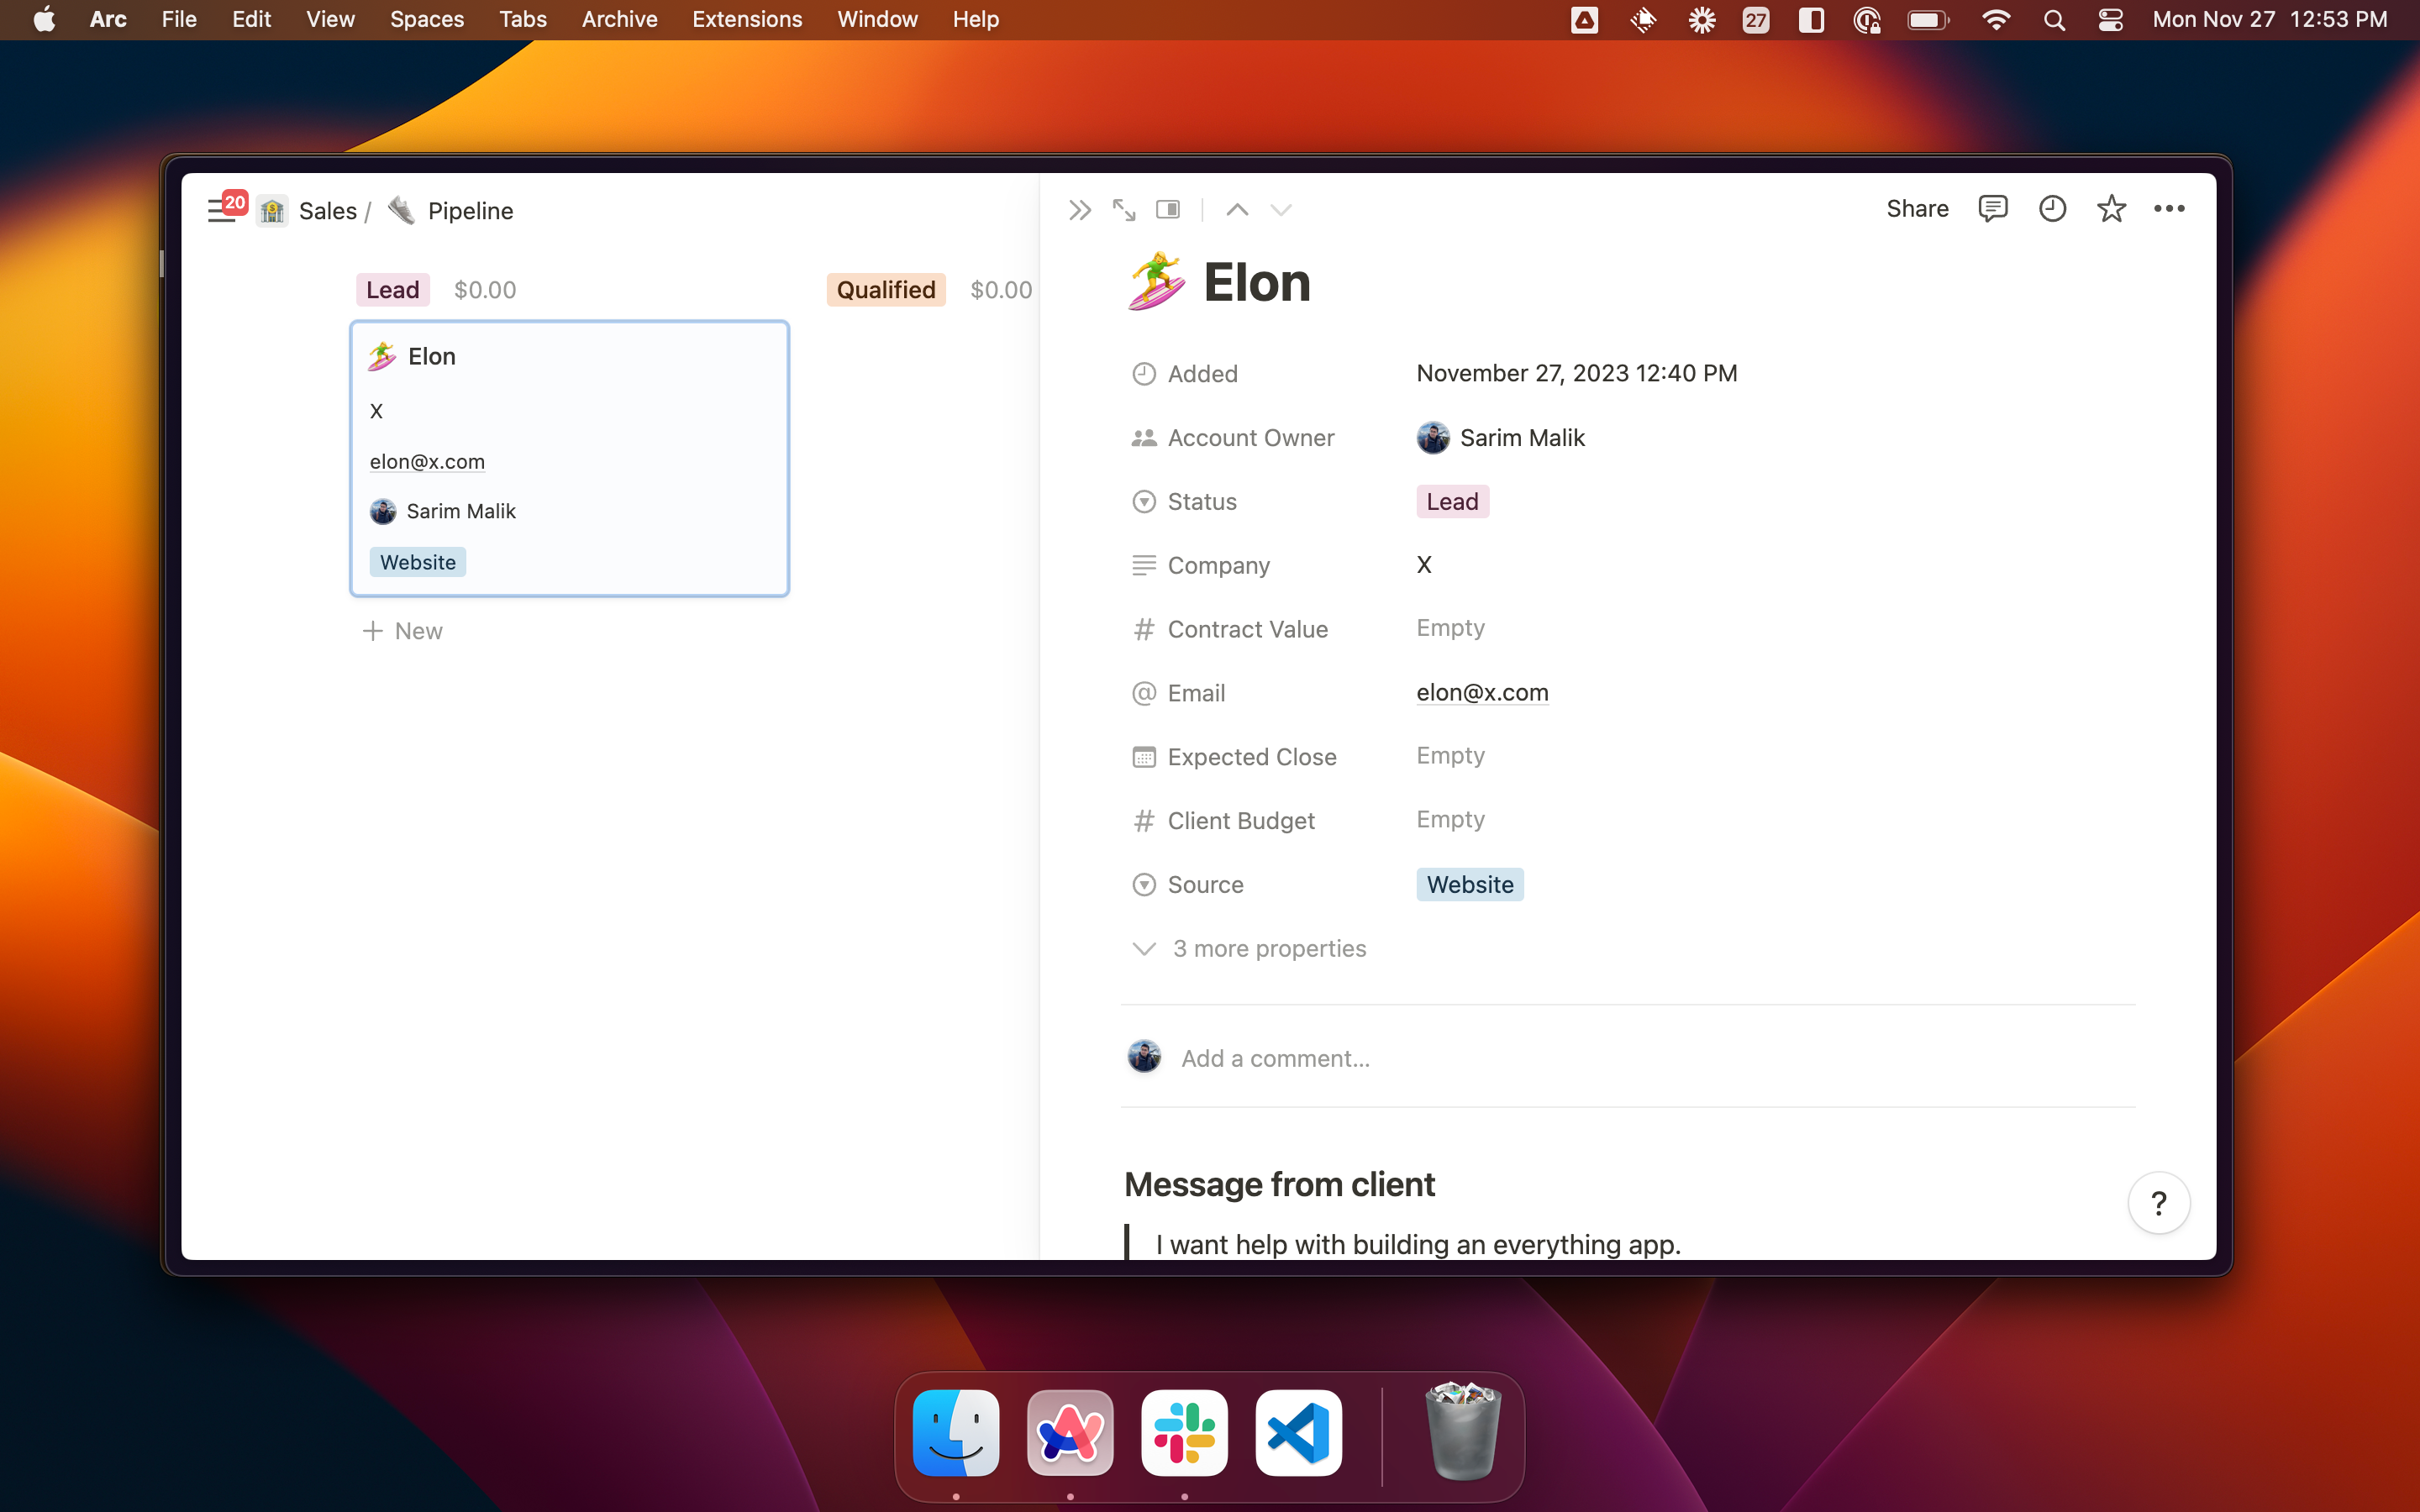 Screenshot of Notion showing the entry created from the contact form. Elon, November 27, by Sarim Malik, status lead, etc.